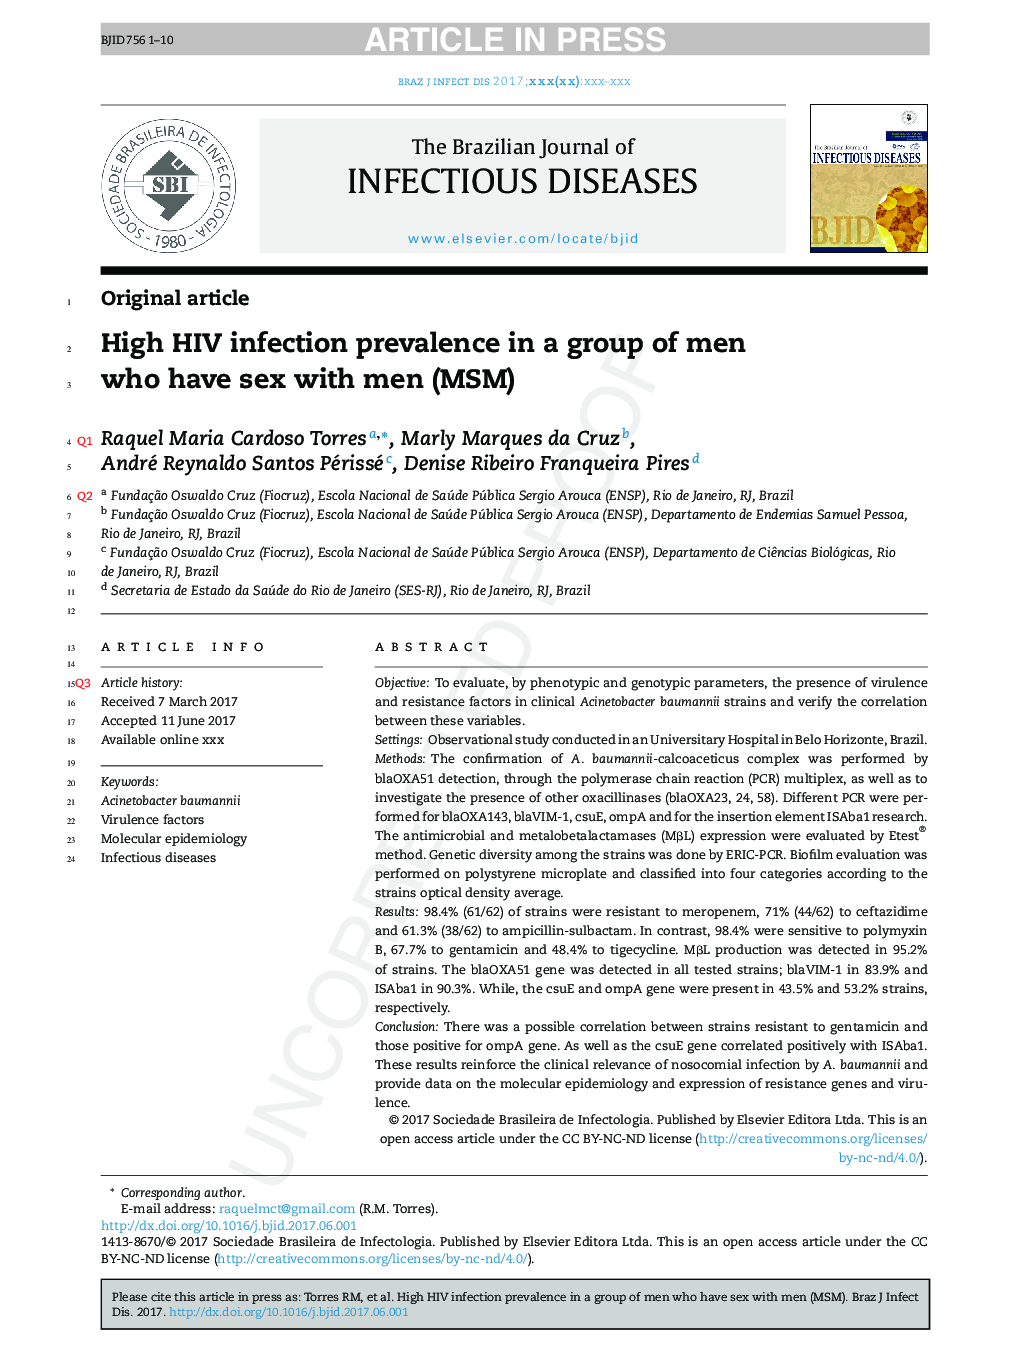 High HIV infection prevalence in a group of men who have sex with men